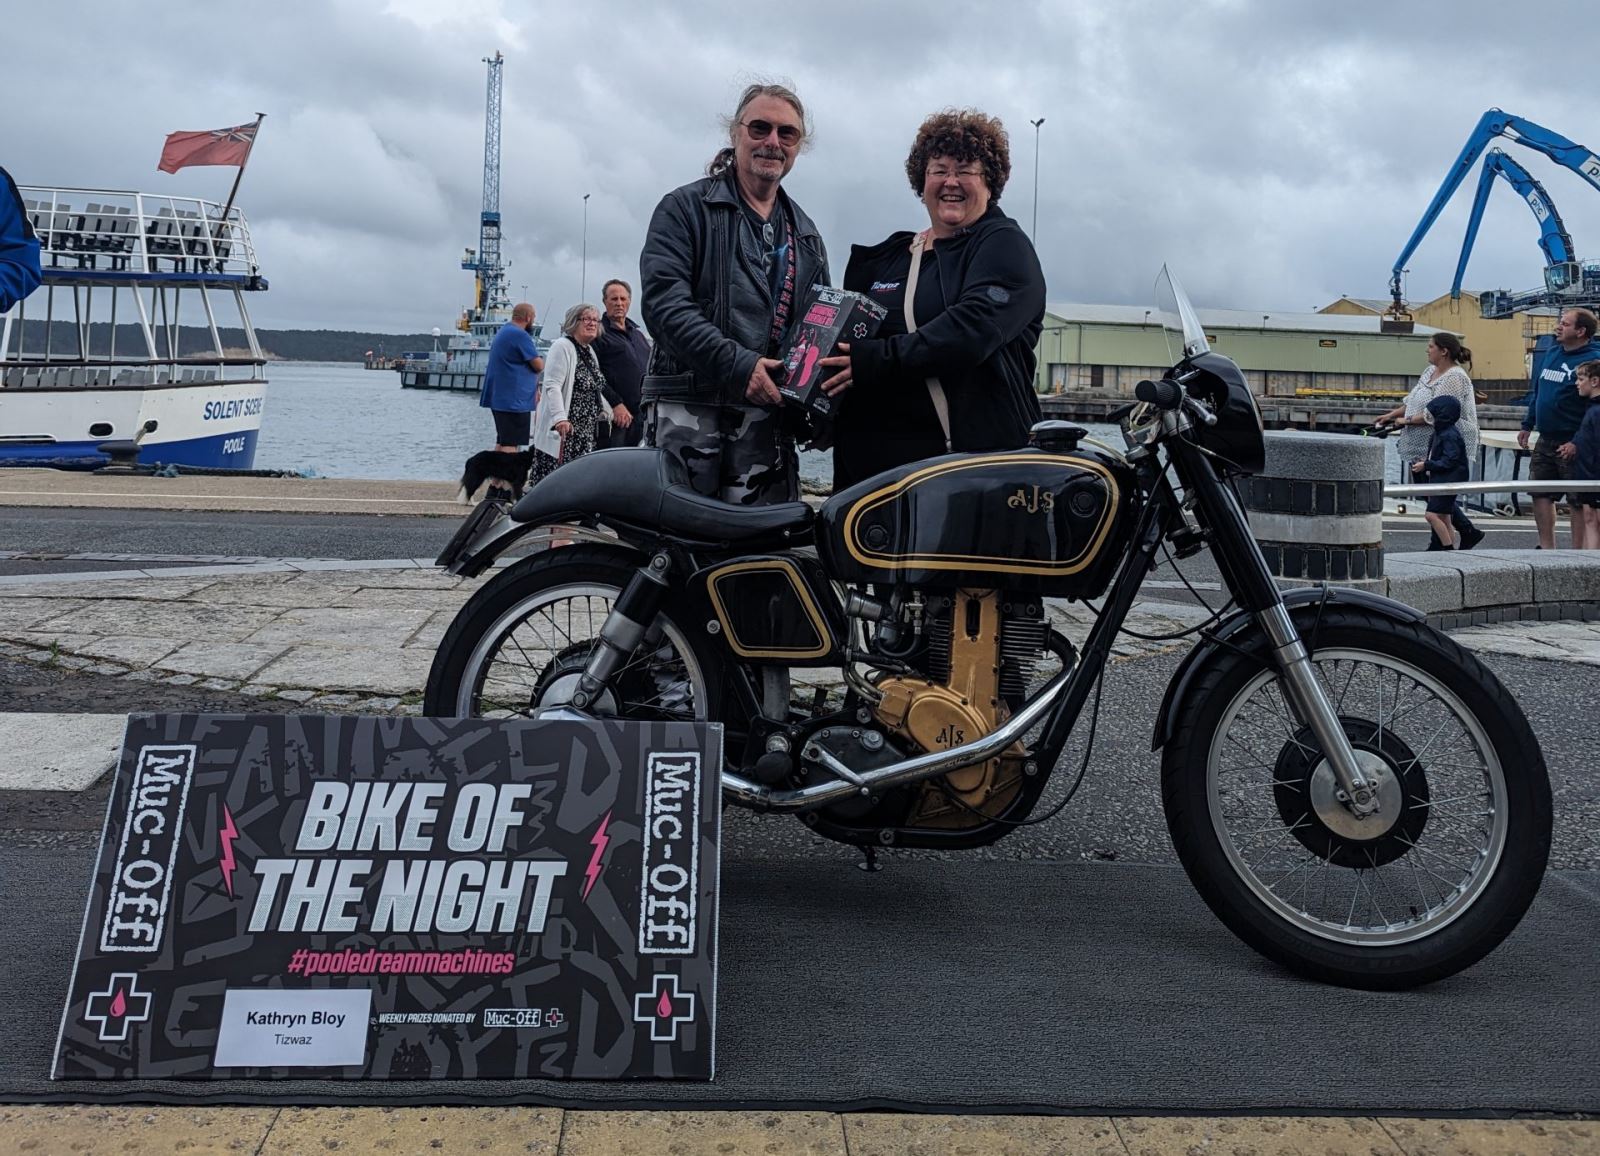 Man named steve accpeting his award for bike of the night at a grey and rainy Pooel quay